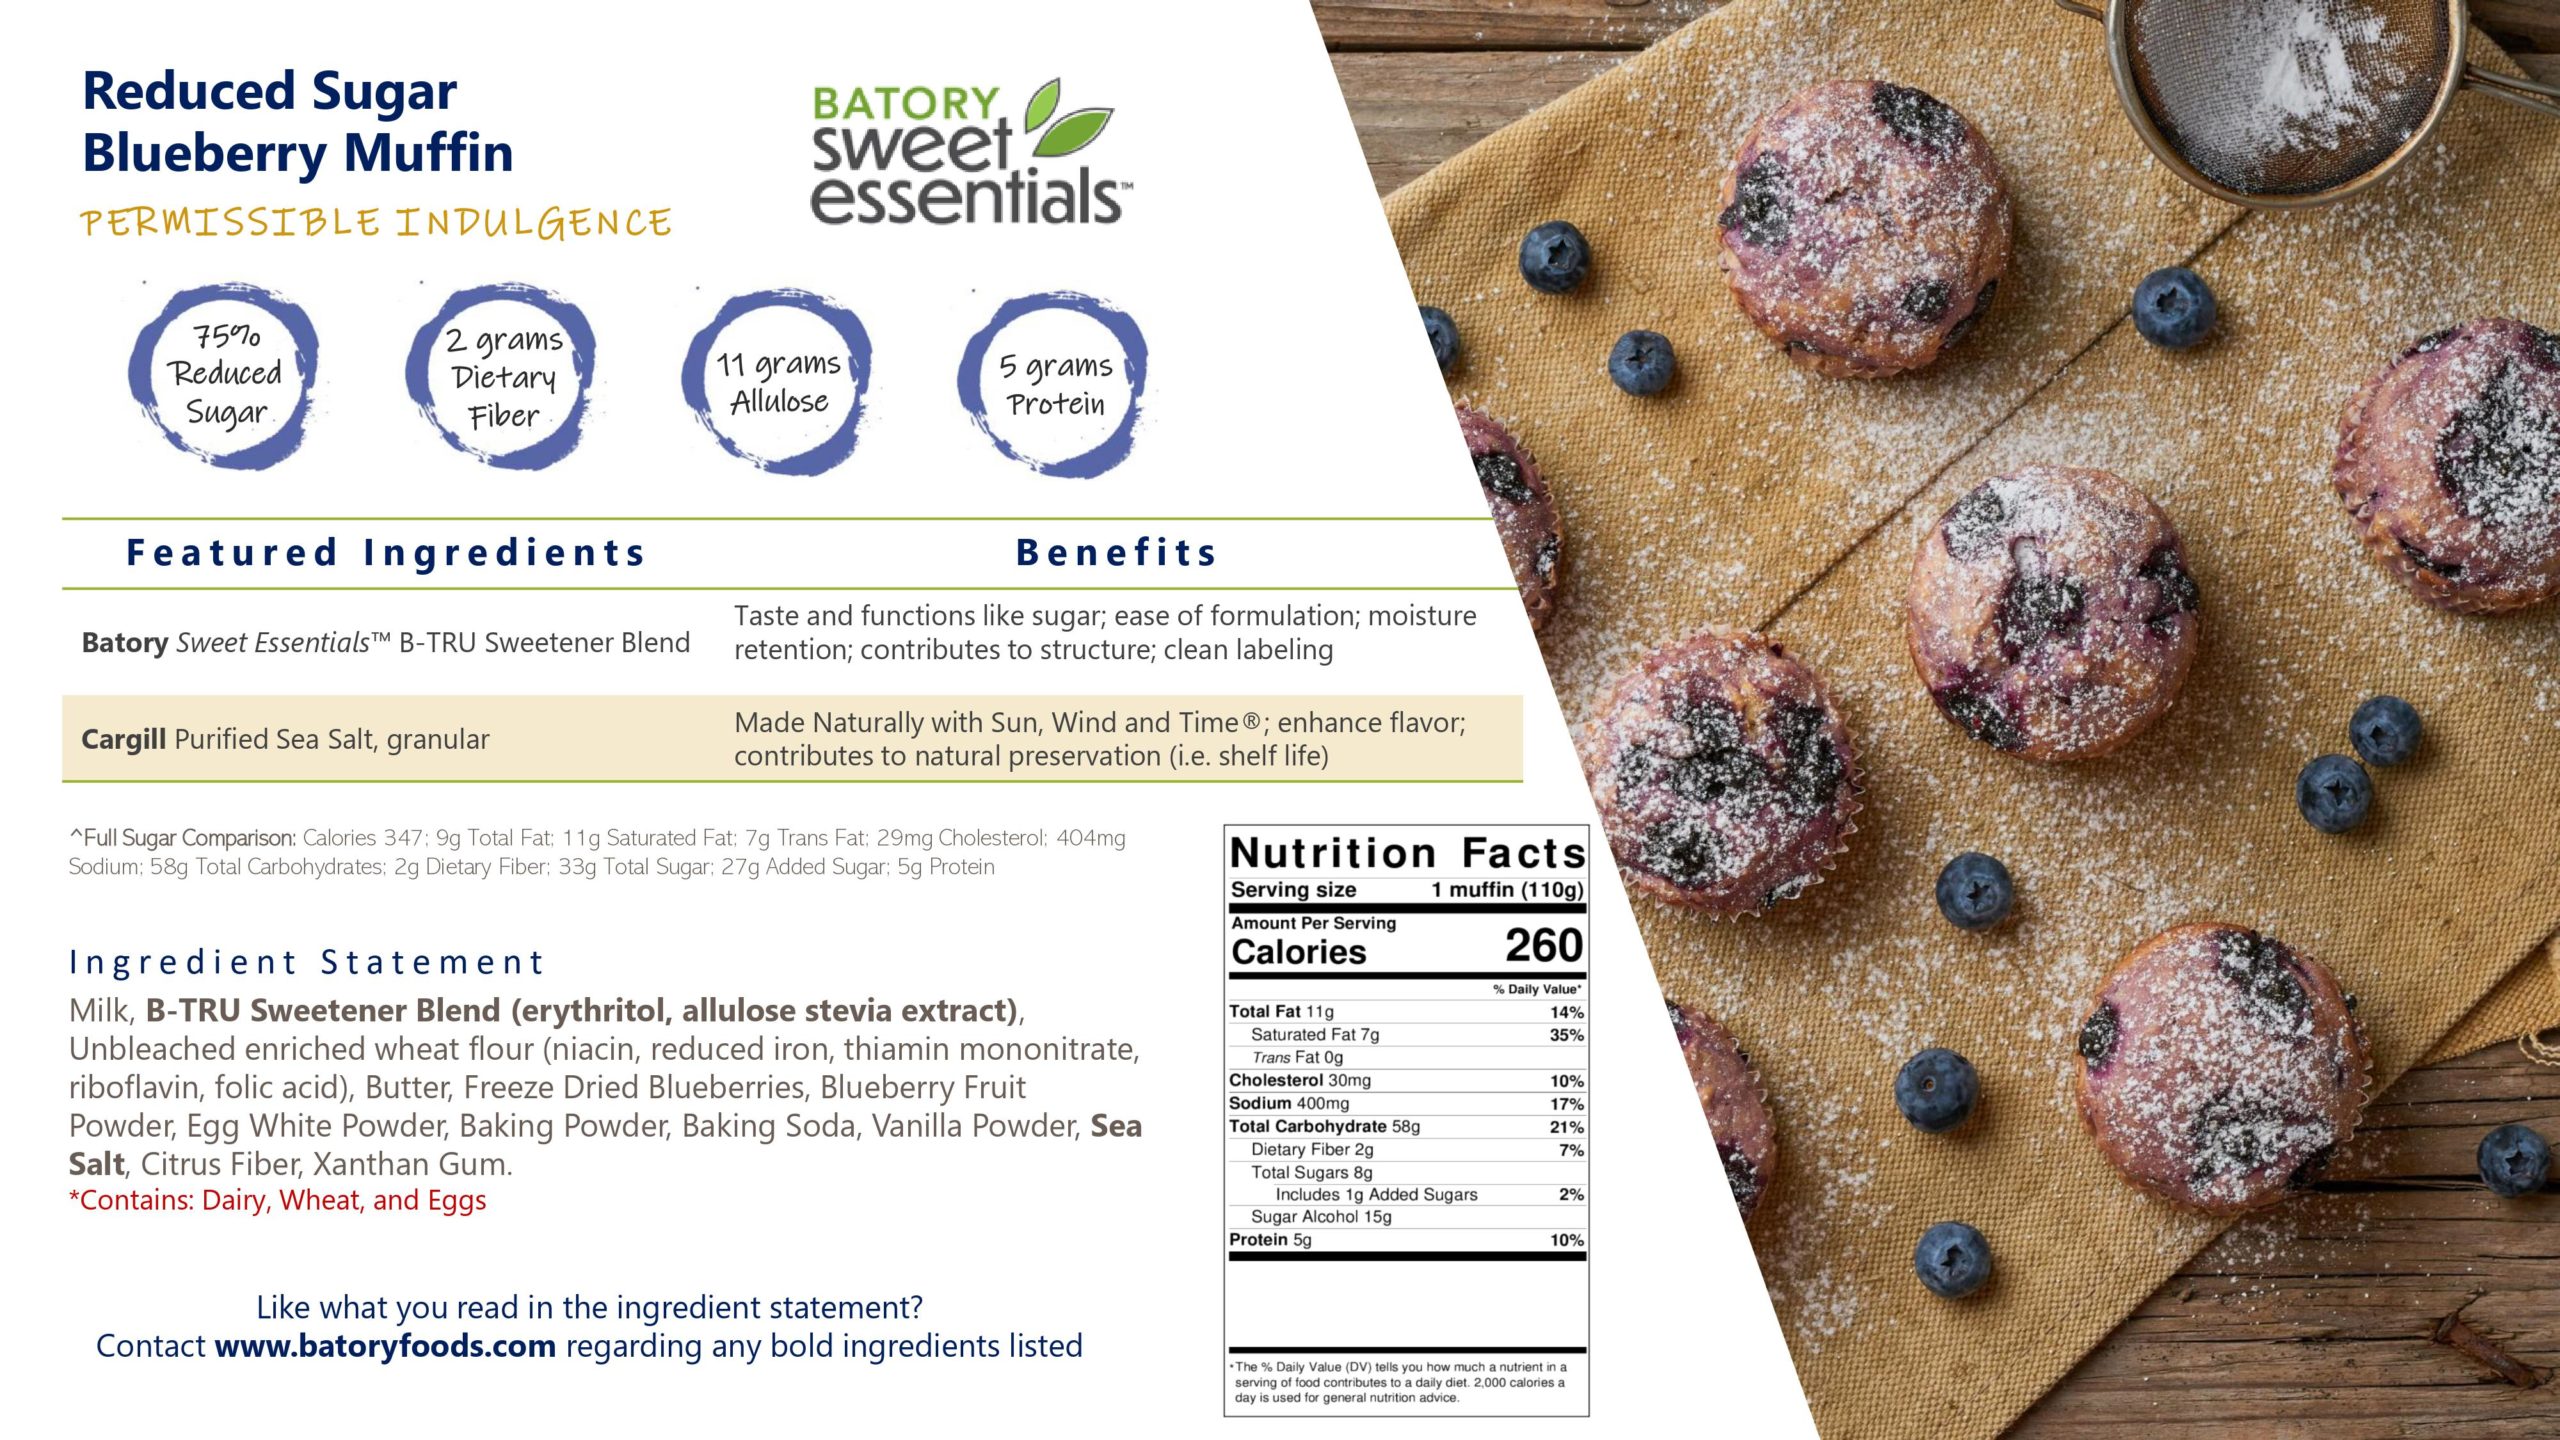 Reduced Sugar Blueberry Muffin Application